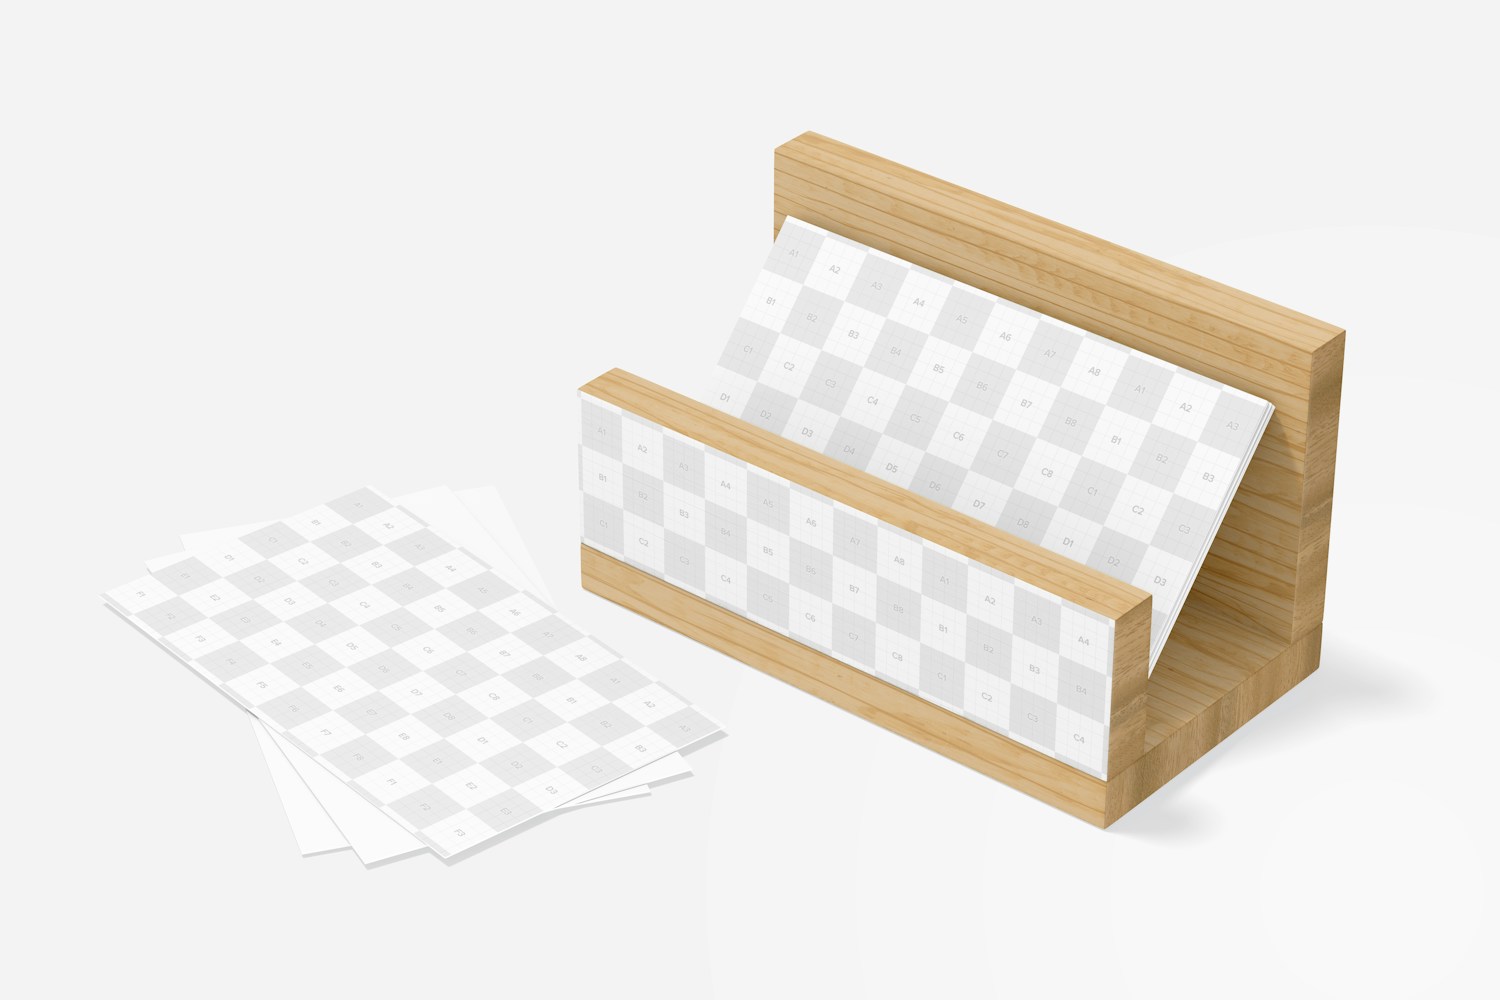 Bamboo Business Card Holder Mockup, Right View